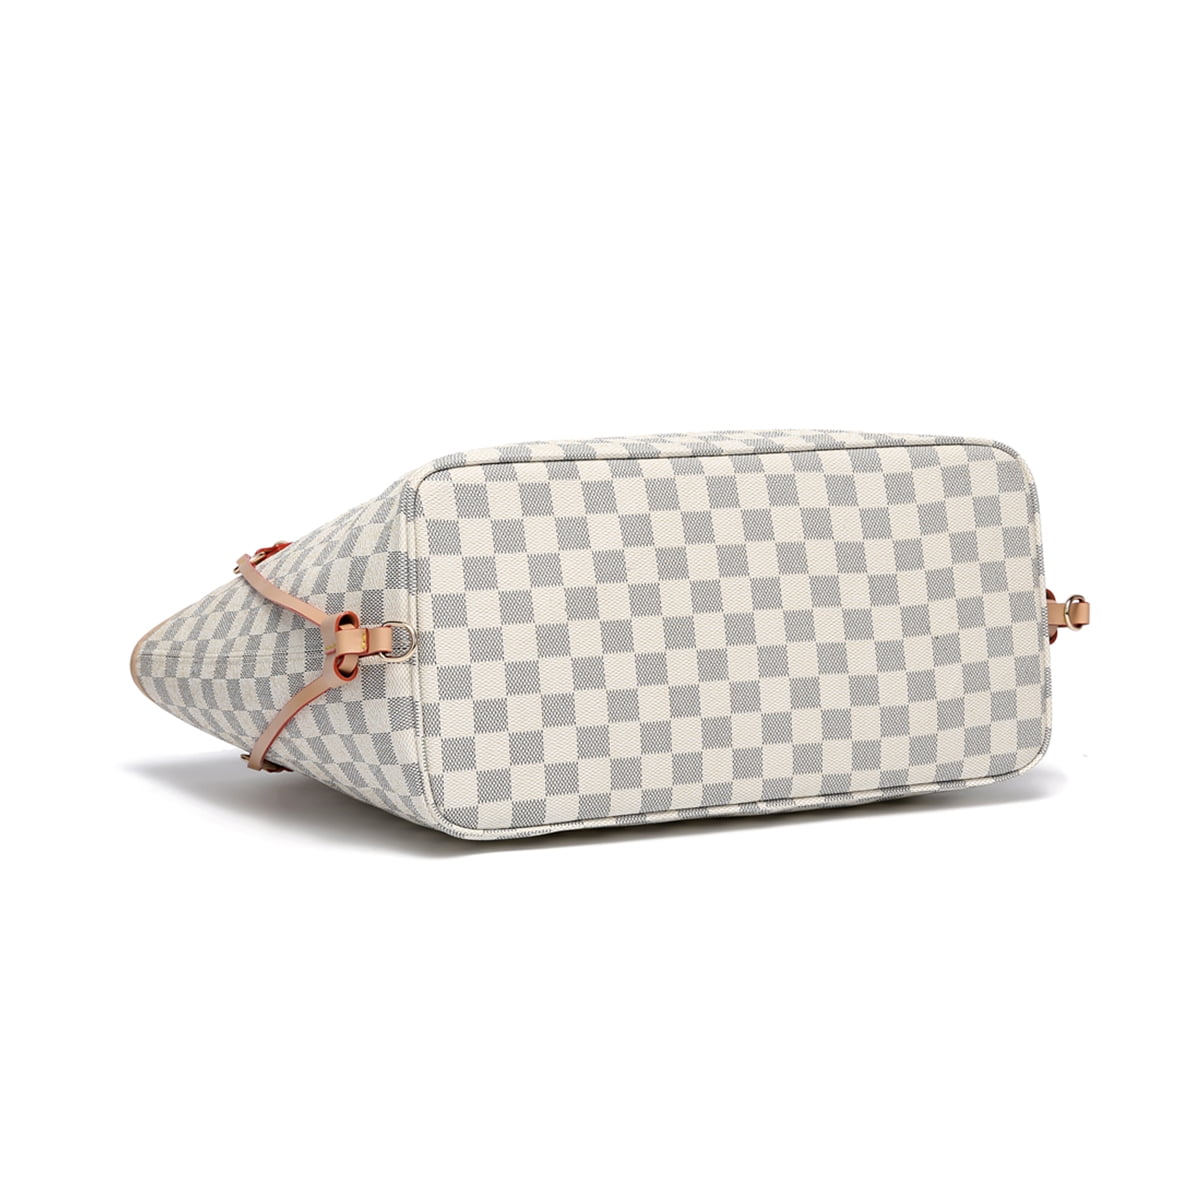 Checkered Leather Tote — nor.